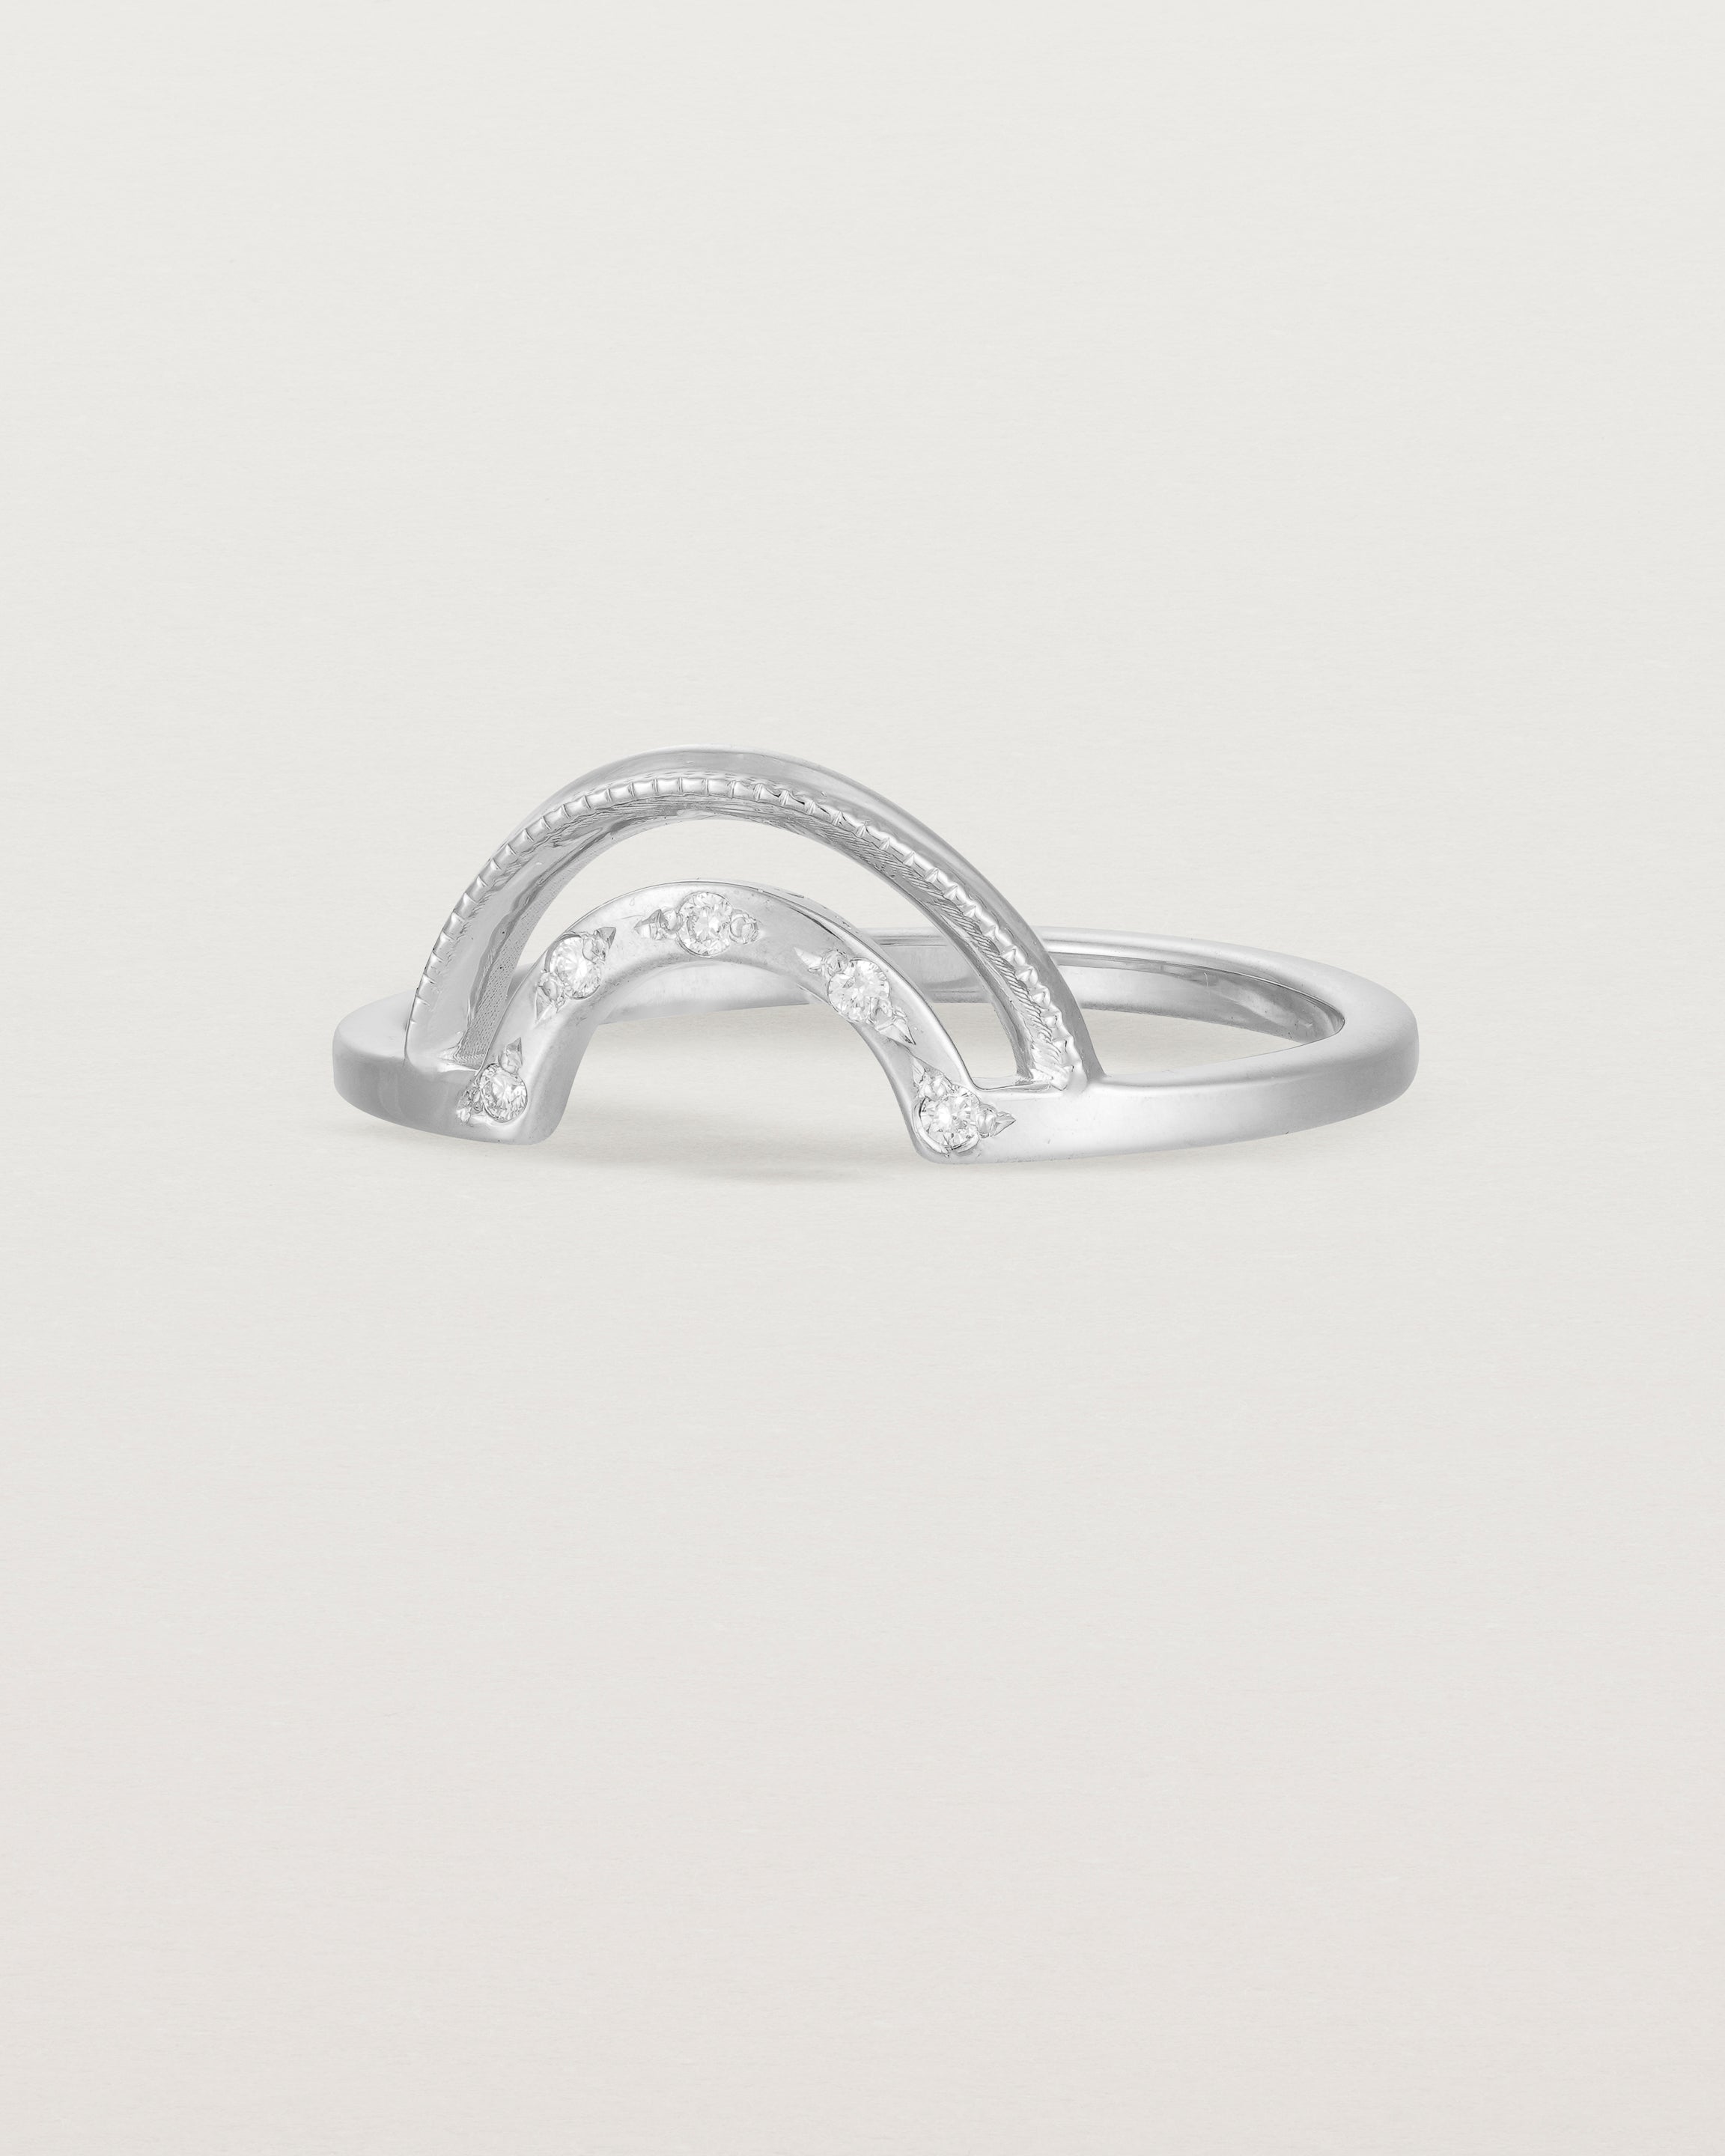 Fit two of a double arc crown ring with white diamonds adoring the inner arc - crafted in white gold.